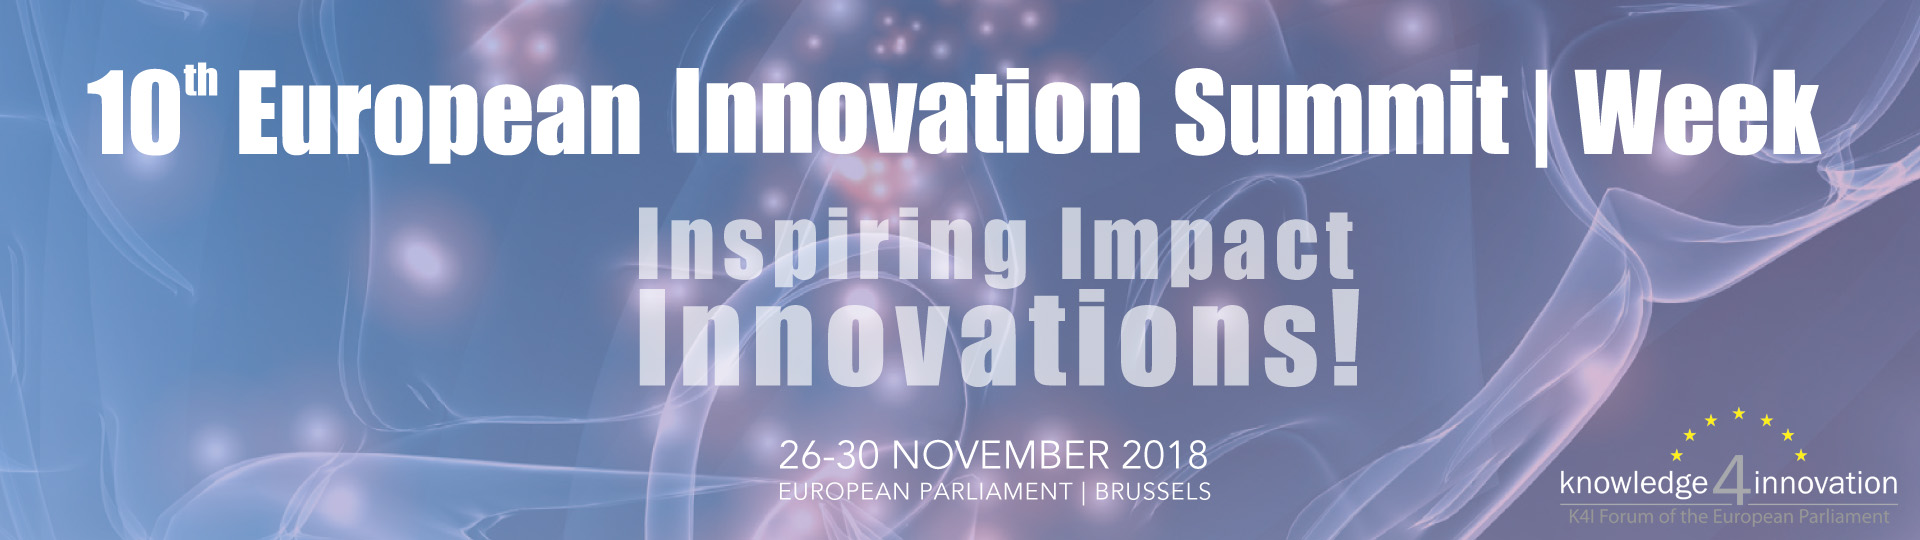 10th European Innovation Summit Week. Inspiring Impact Innovations! 16-30 November 2018. European Parliment, Brussels. Knowledge 4 Innovation. K4I Forum of the European Parliment